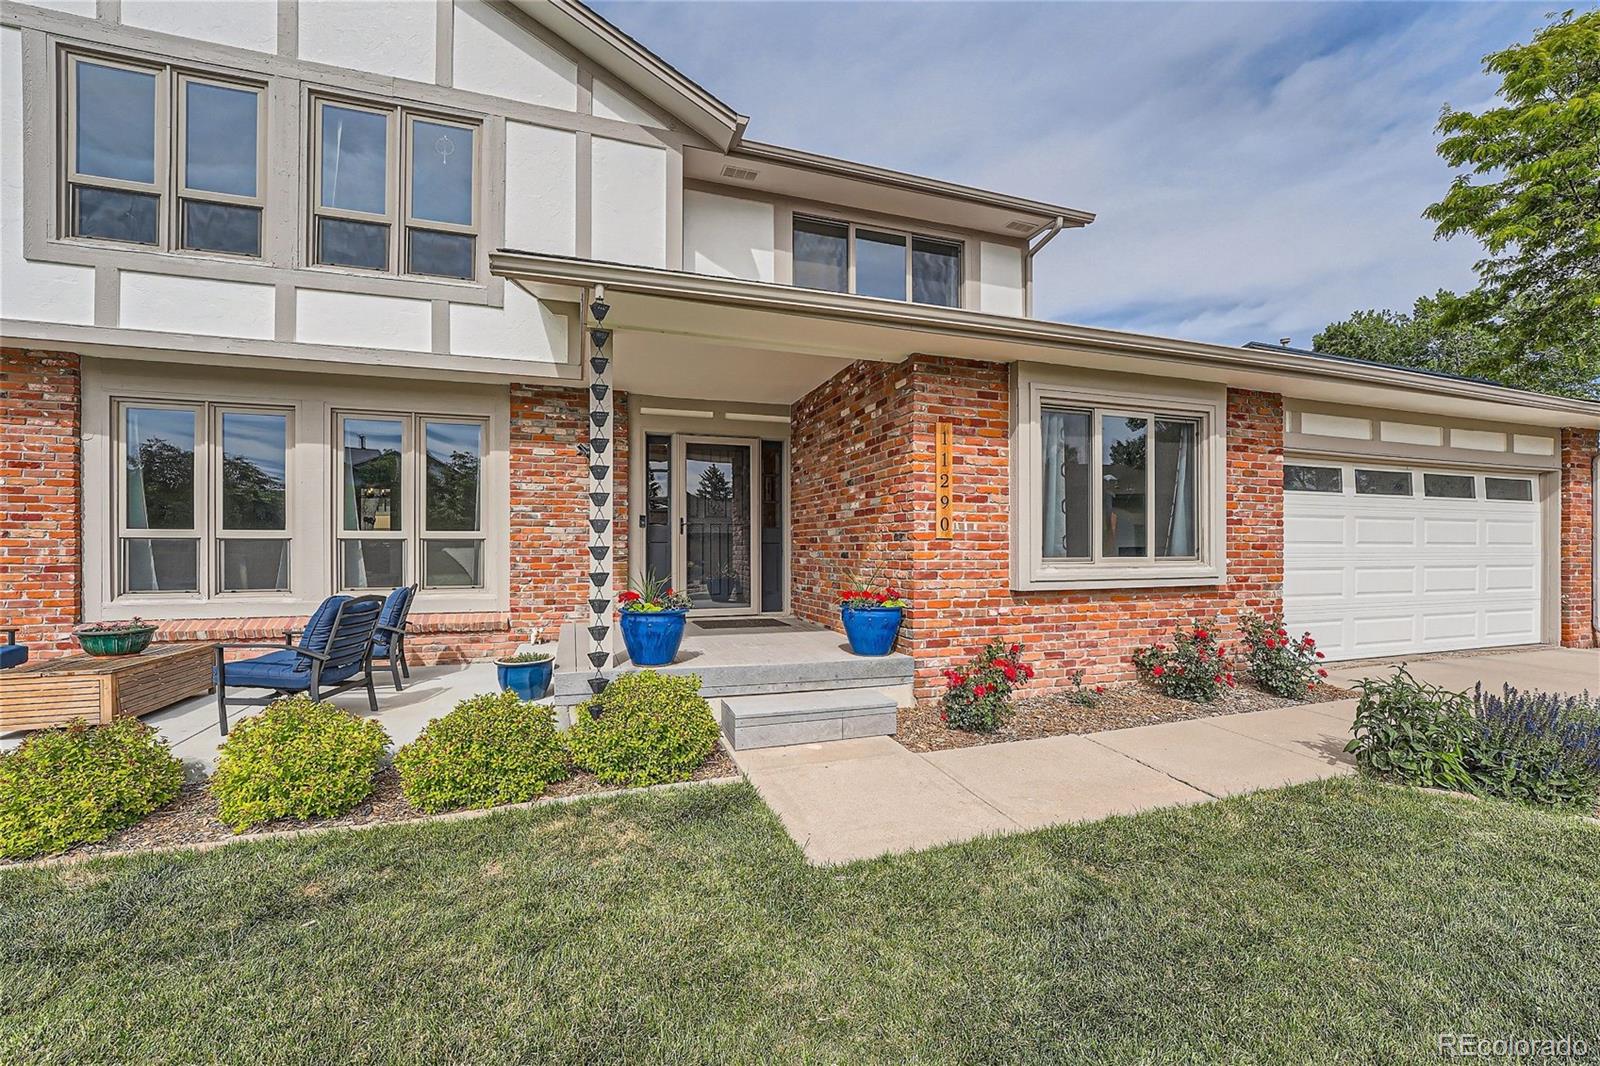 Report Image for 11290  Ranch Place,Westminster, Colorado